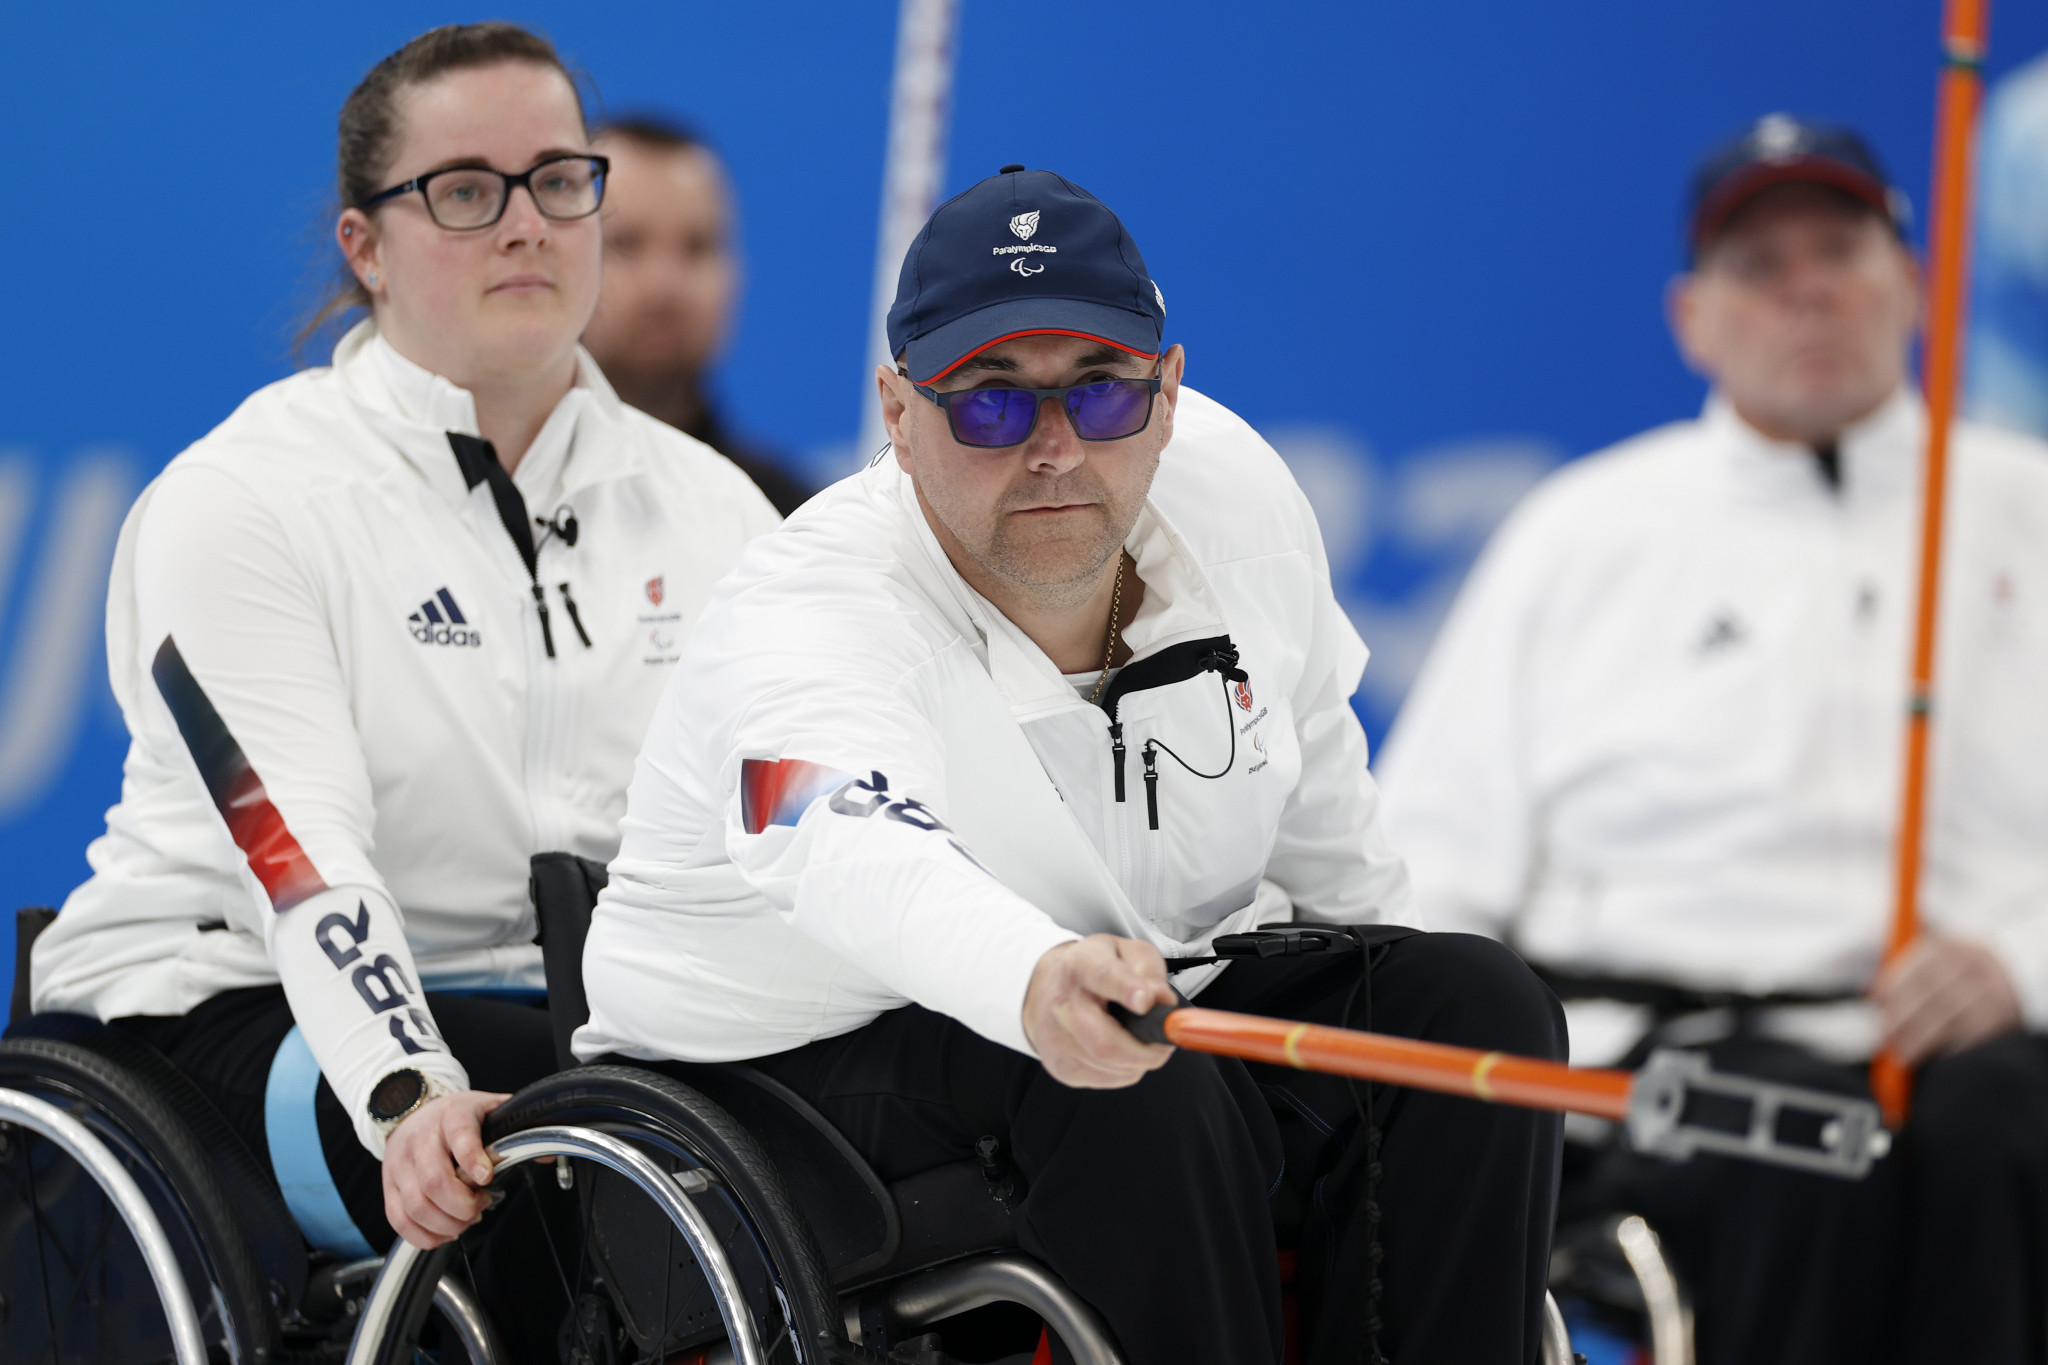 Britain's two losses on day five means they cannot qualify for the next round of the wheelchair curling tournament ©Getty Images